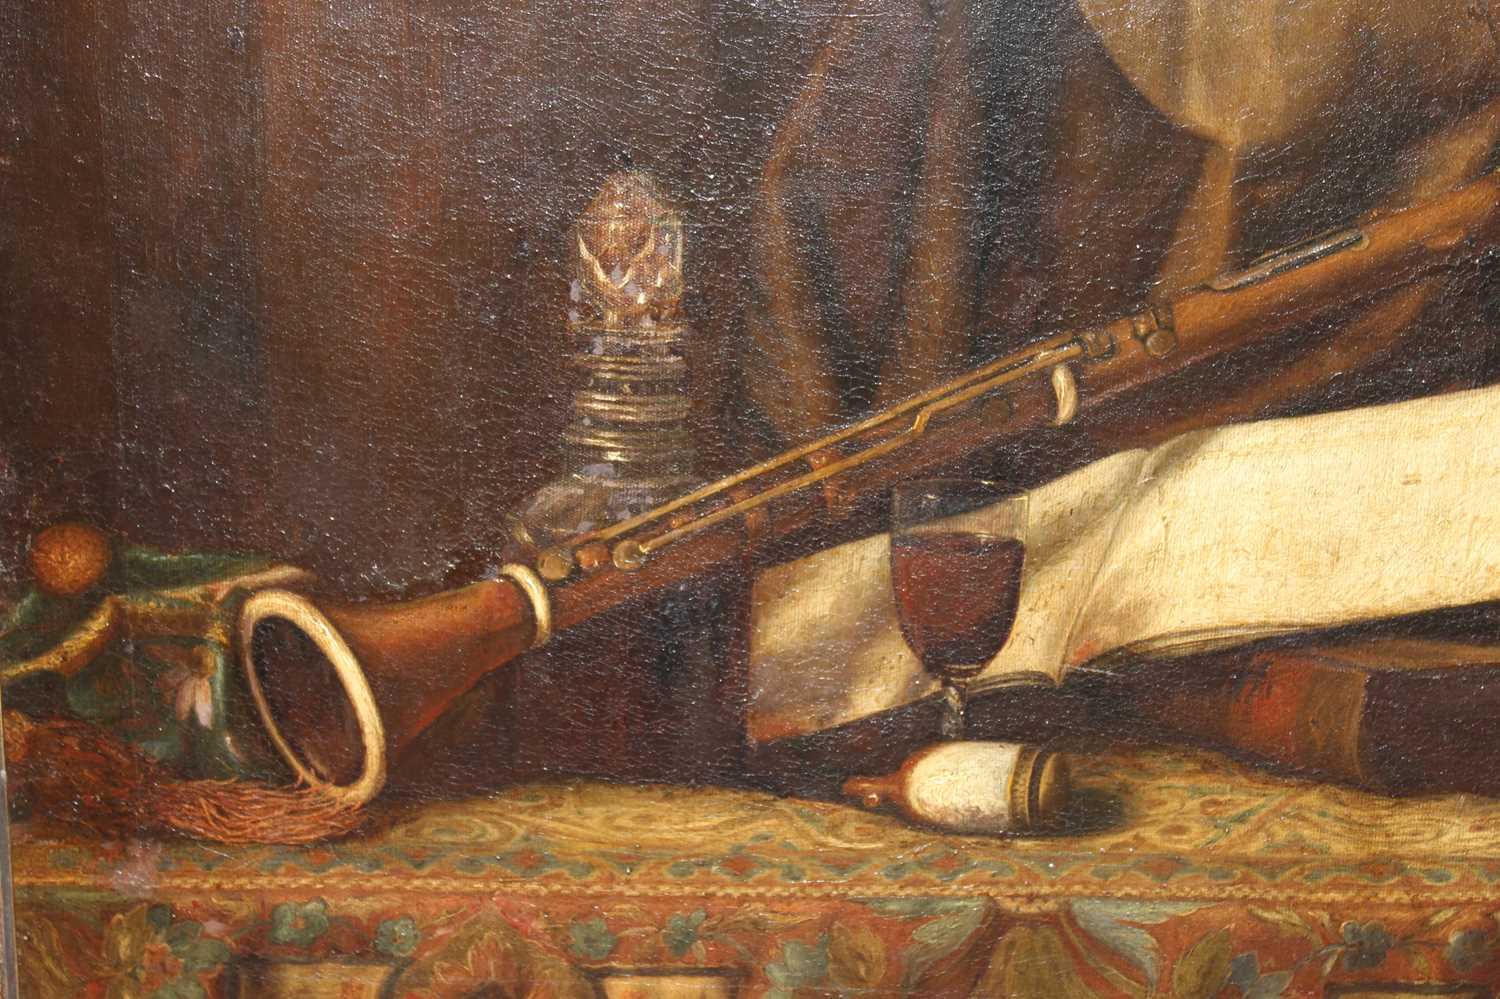 19th century English school - still life with clarinet and glass of wine, oil on canvas, 50x67cm ( - Image 3 of 6